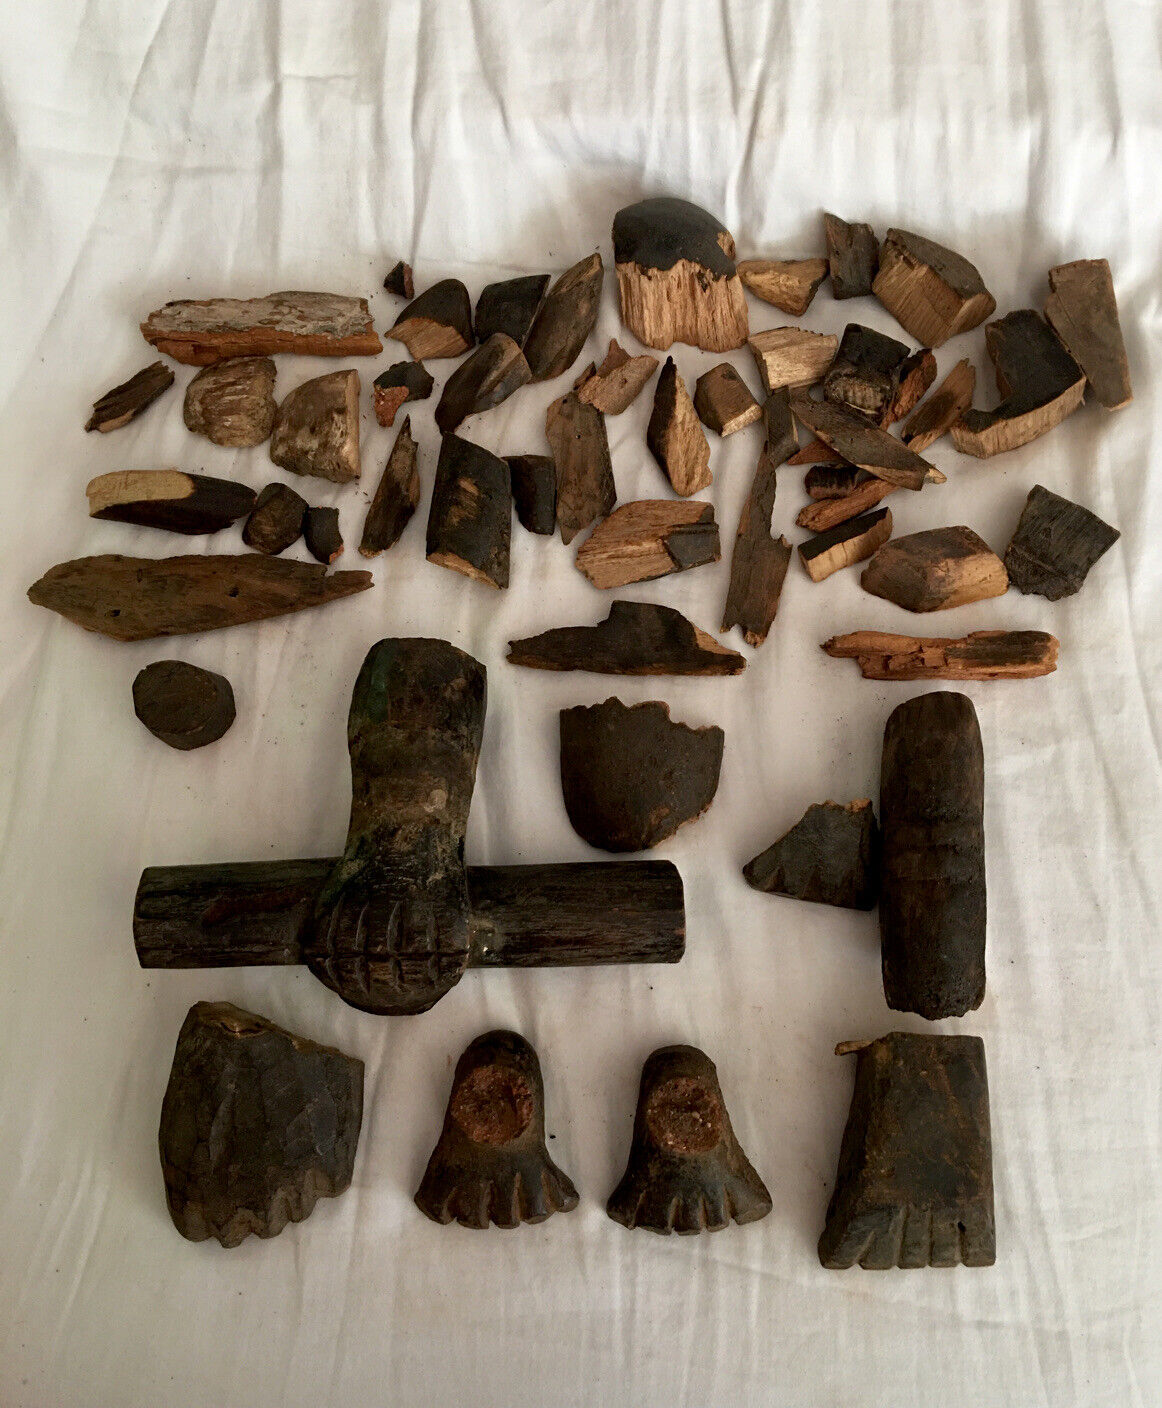 Lot of Pre-Columbian Art Pottery Primitive Wood Fragments Archaeological Salvage